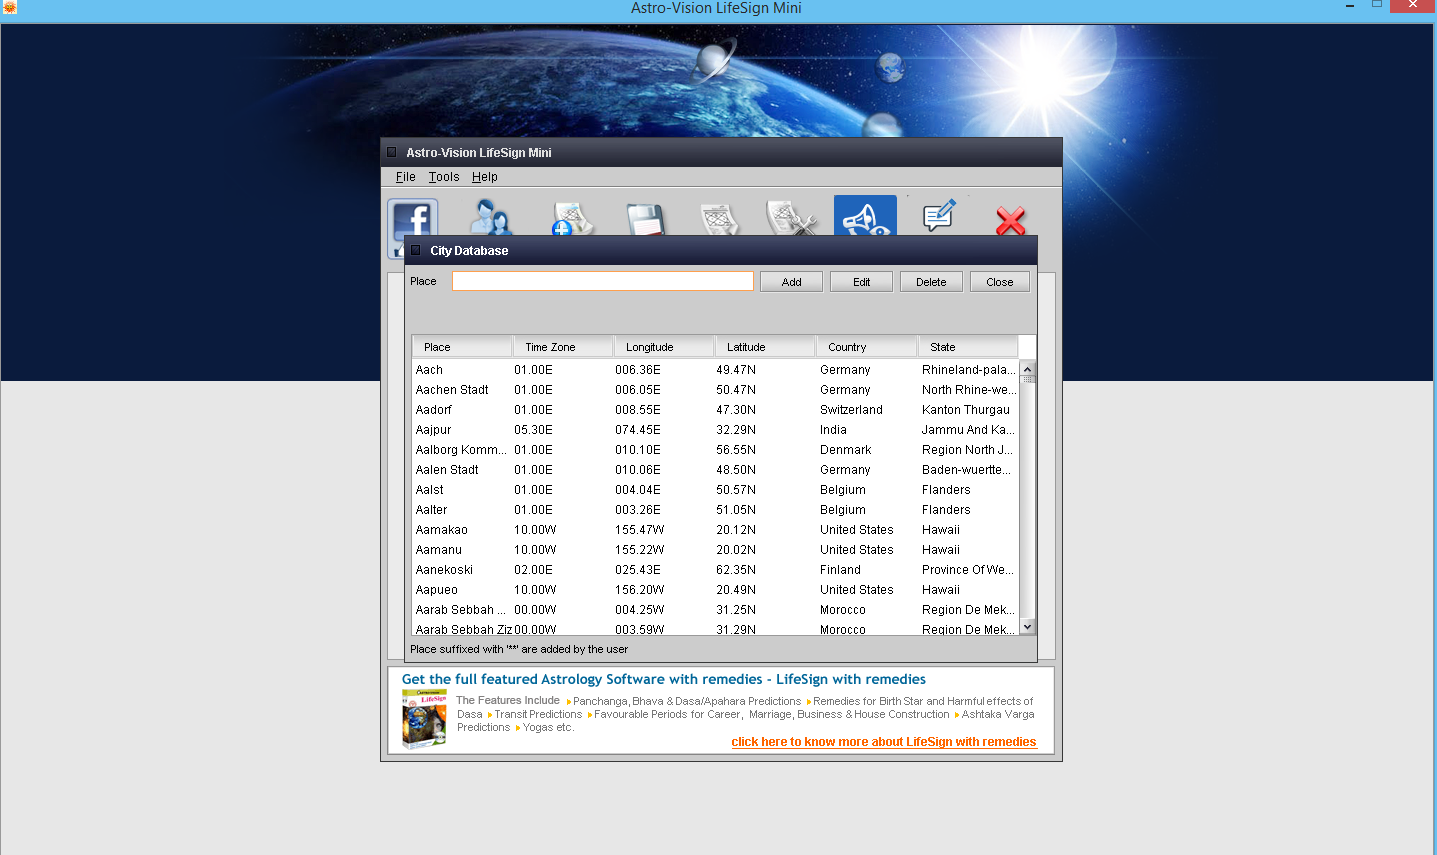 astro vision lifesign 12.5 cracked free download